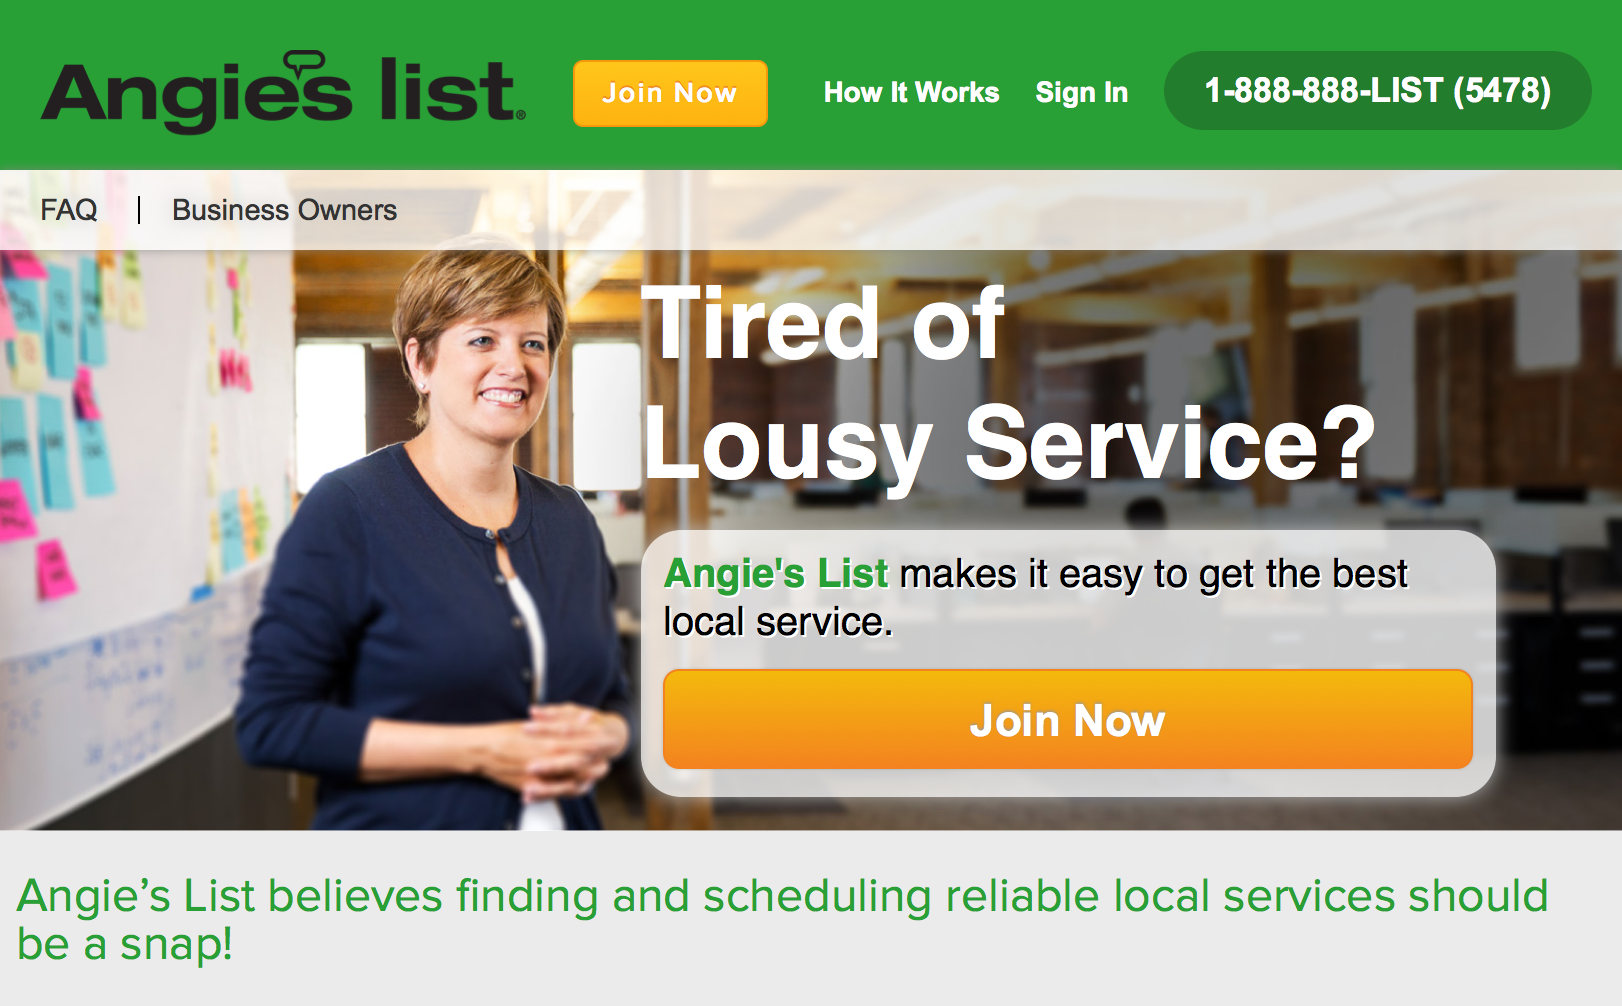 Joining Angie’s List could be an excellent way to find new customers.